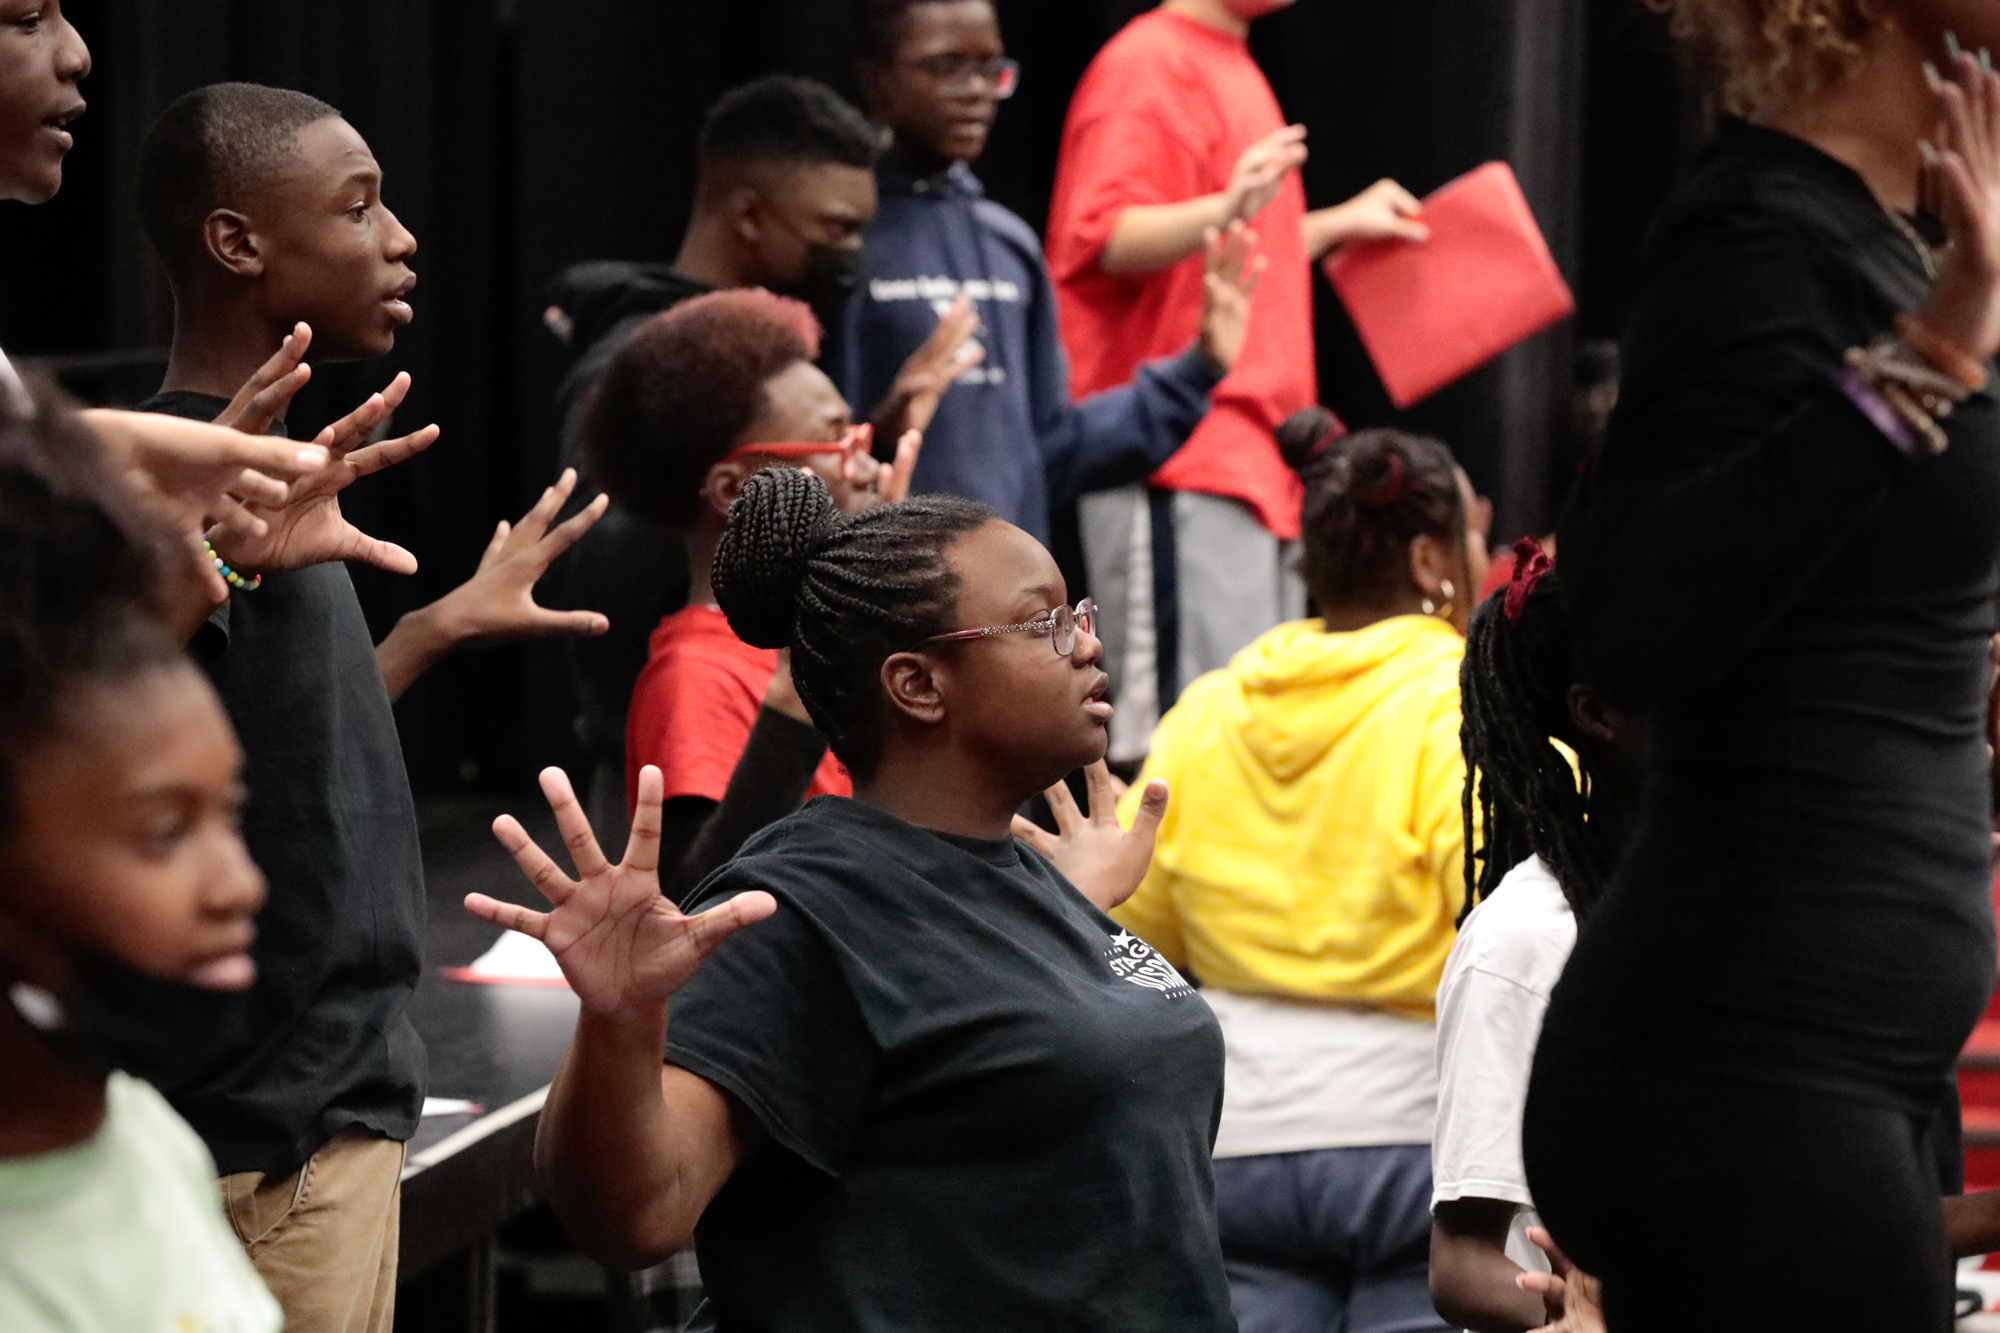 Students are ready to shine at the Westcoast Black Theatre Troupe's Stage of Discovery event. (Courtesy photo: Sorcha Augustine)